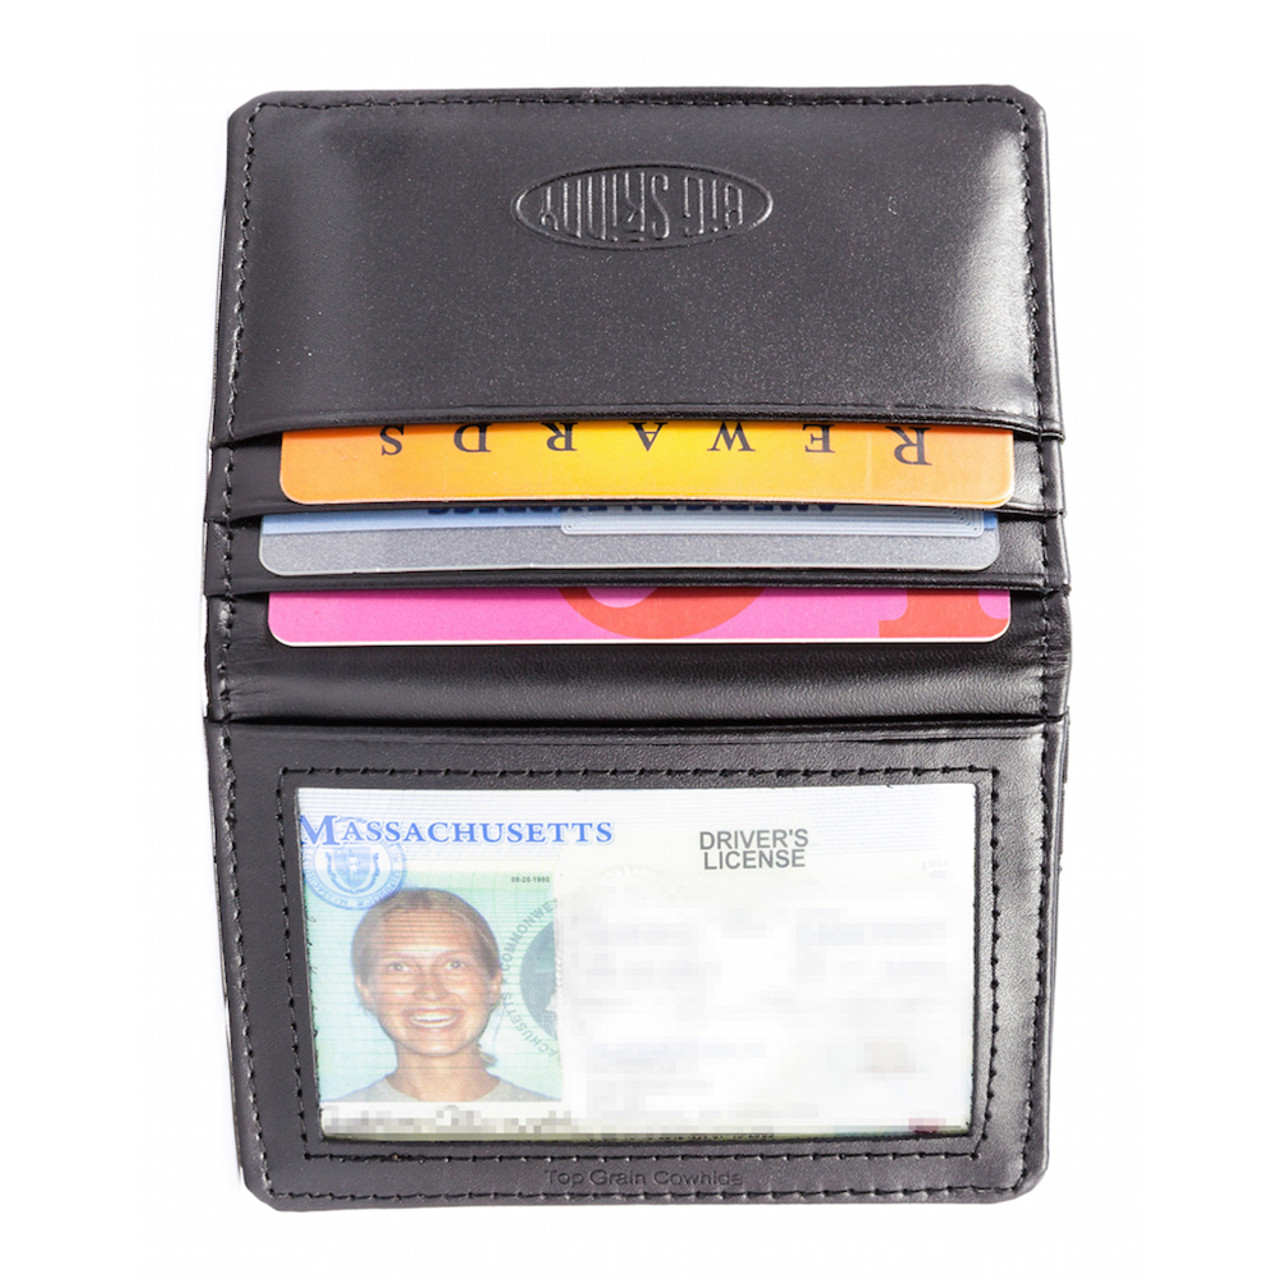 Evergreen Black University of Louisville Leather Tri-Fold Wallet, Best  Price and Reviews